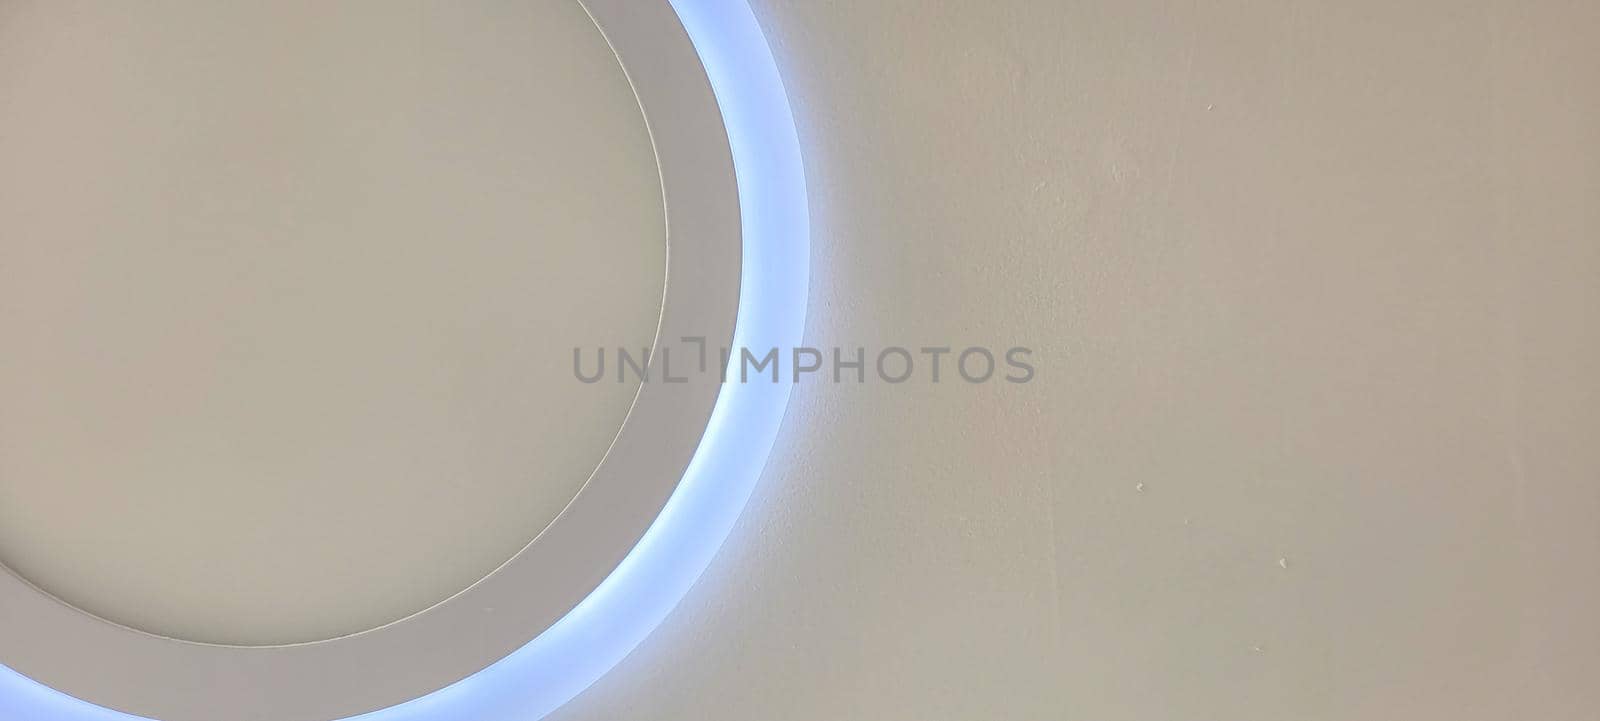 backlit background with circular filaments of frames, with shadows and light glow